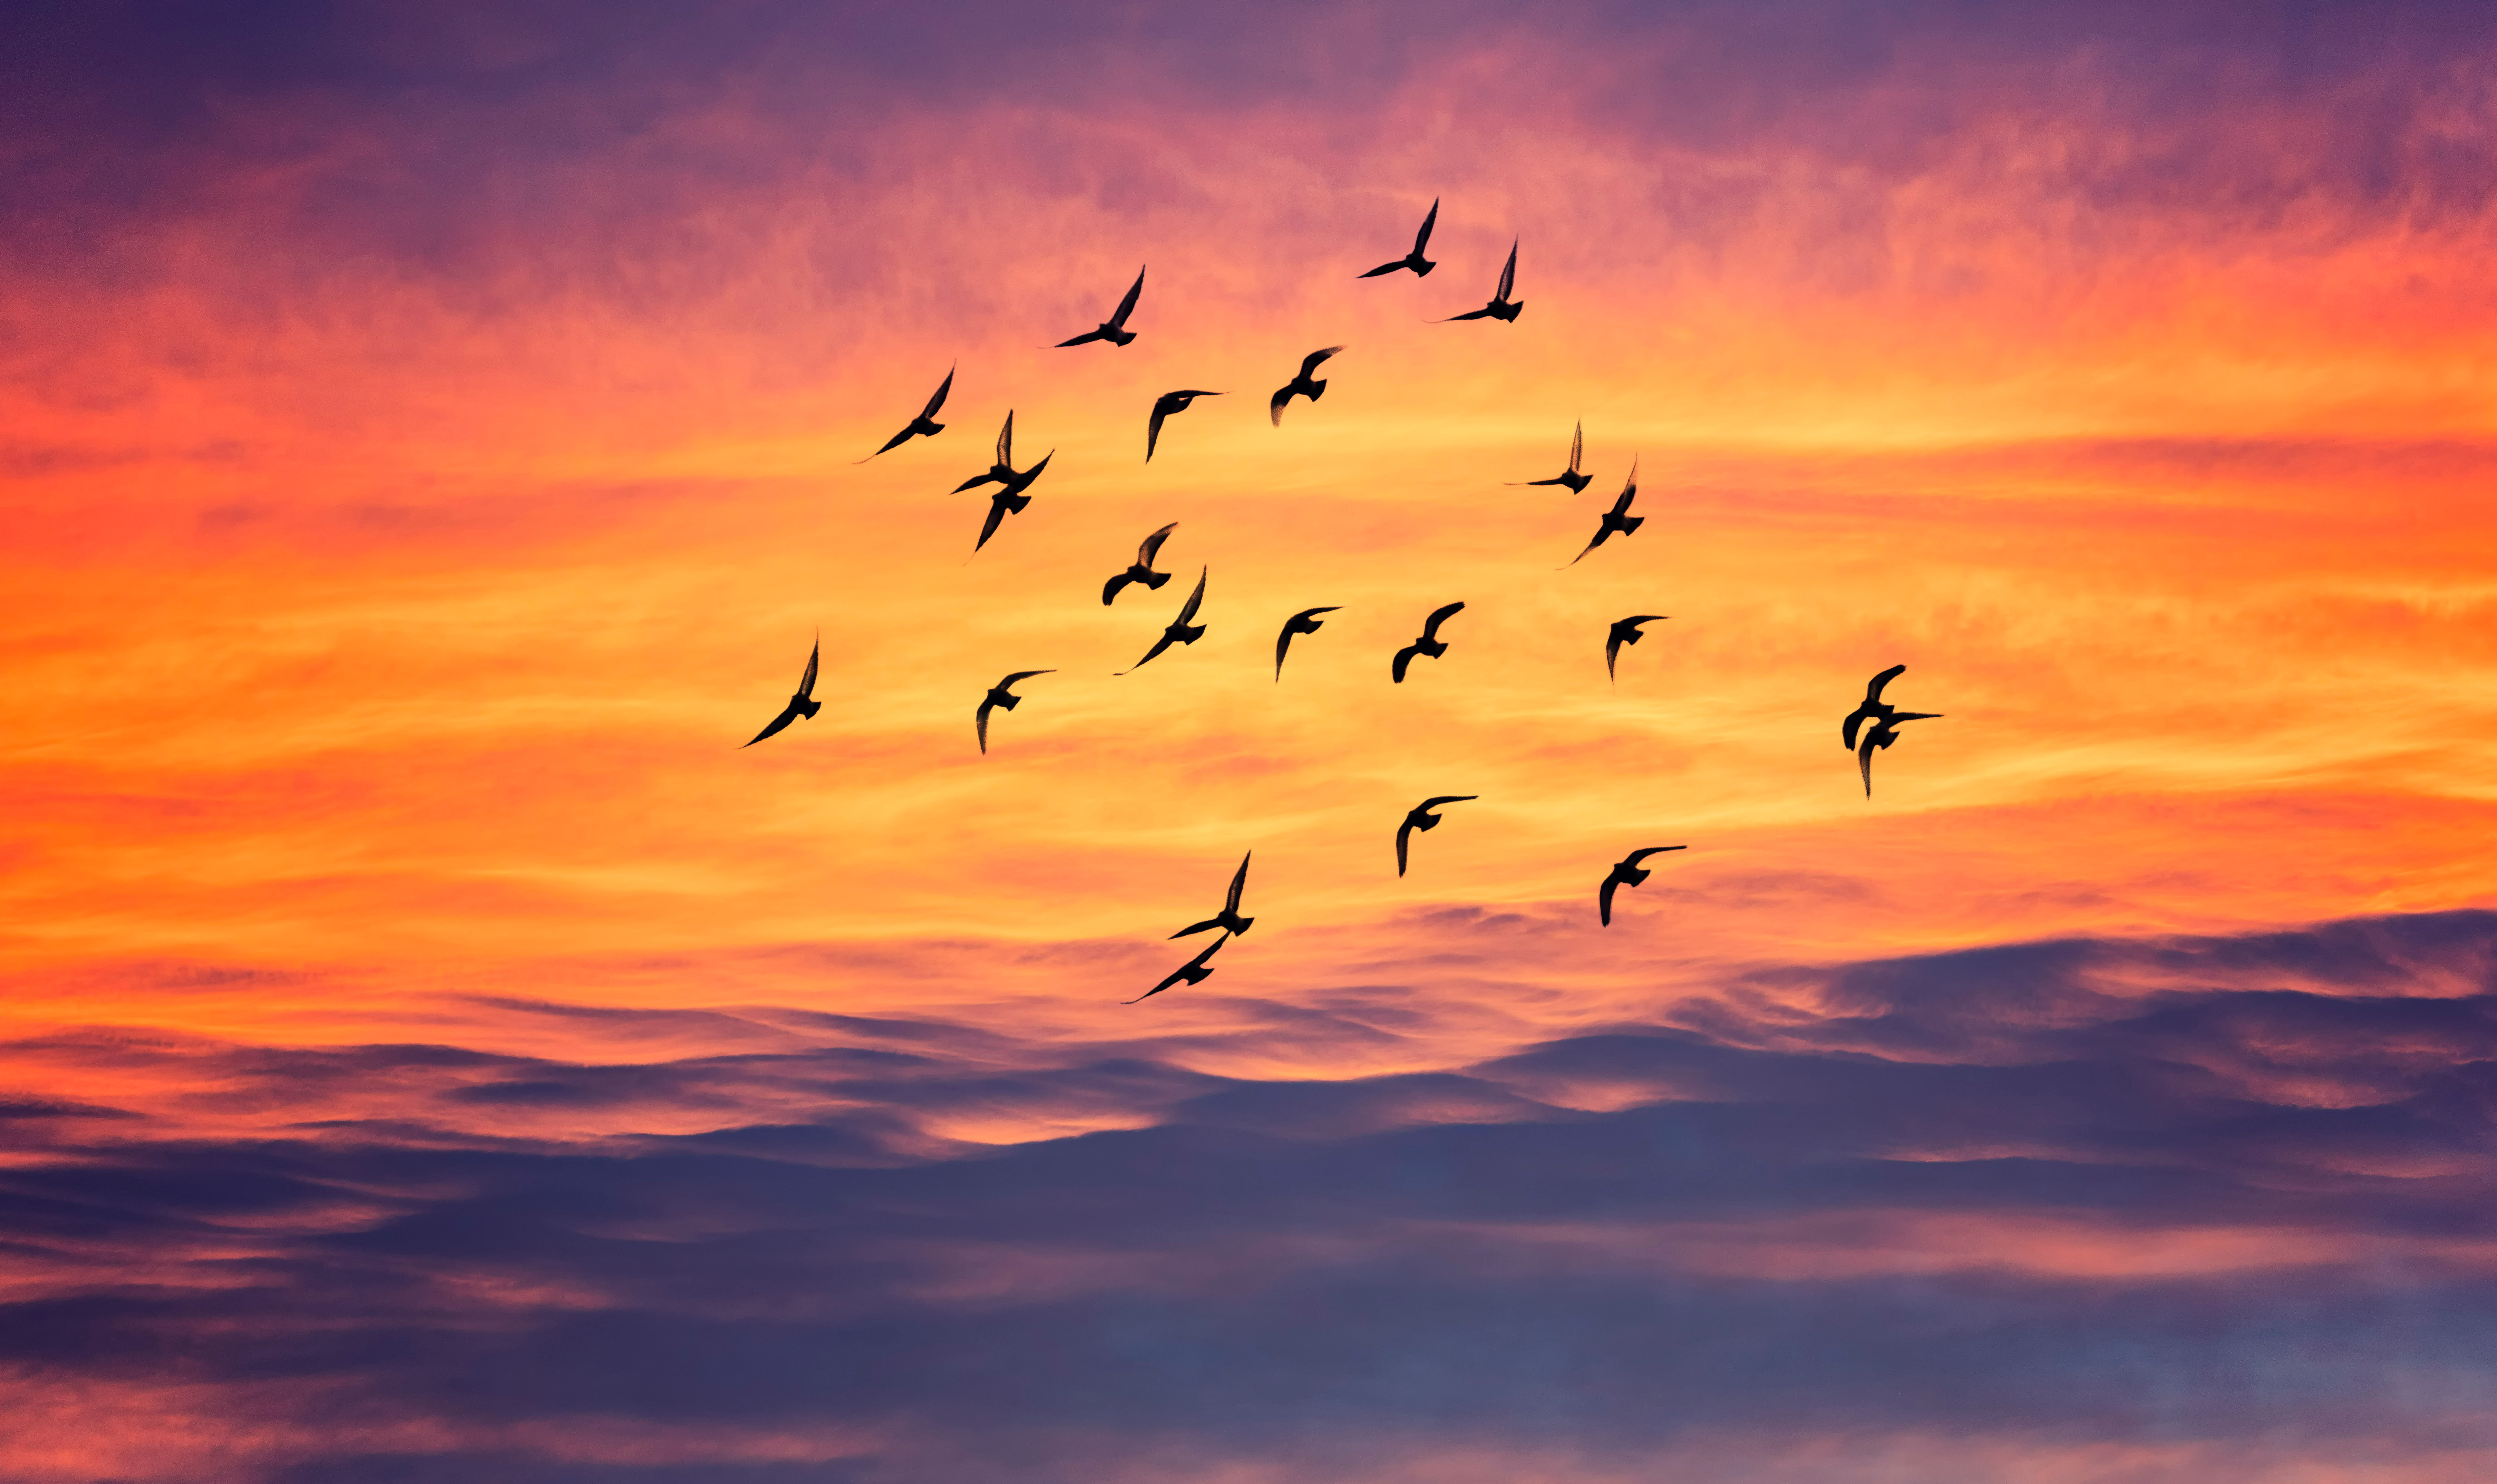 A flock of birds flying at sunset.